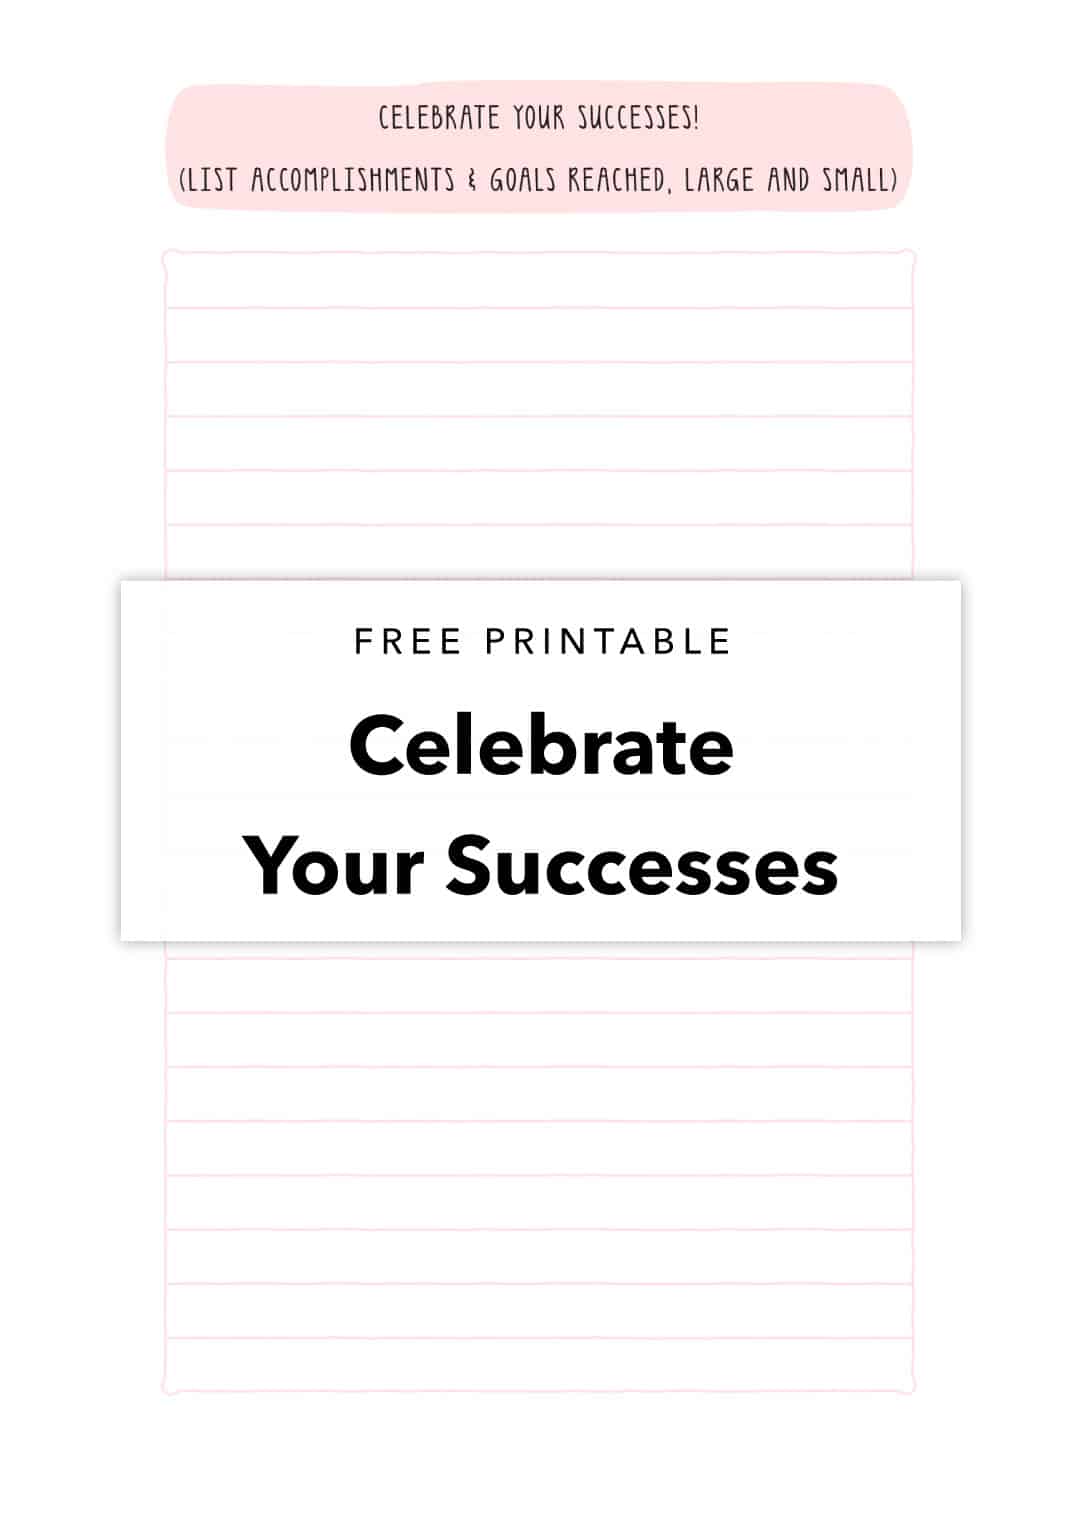 Celebrate your successes - Free Printable